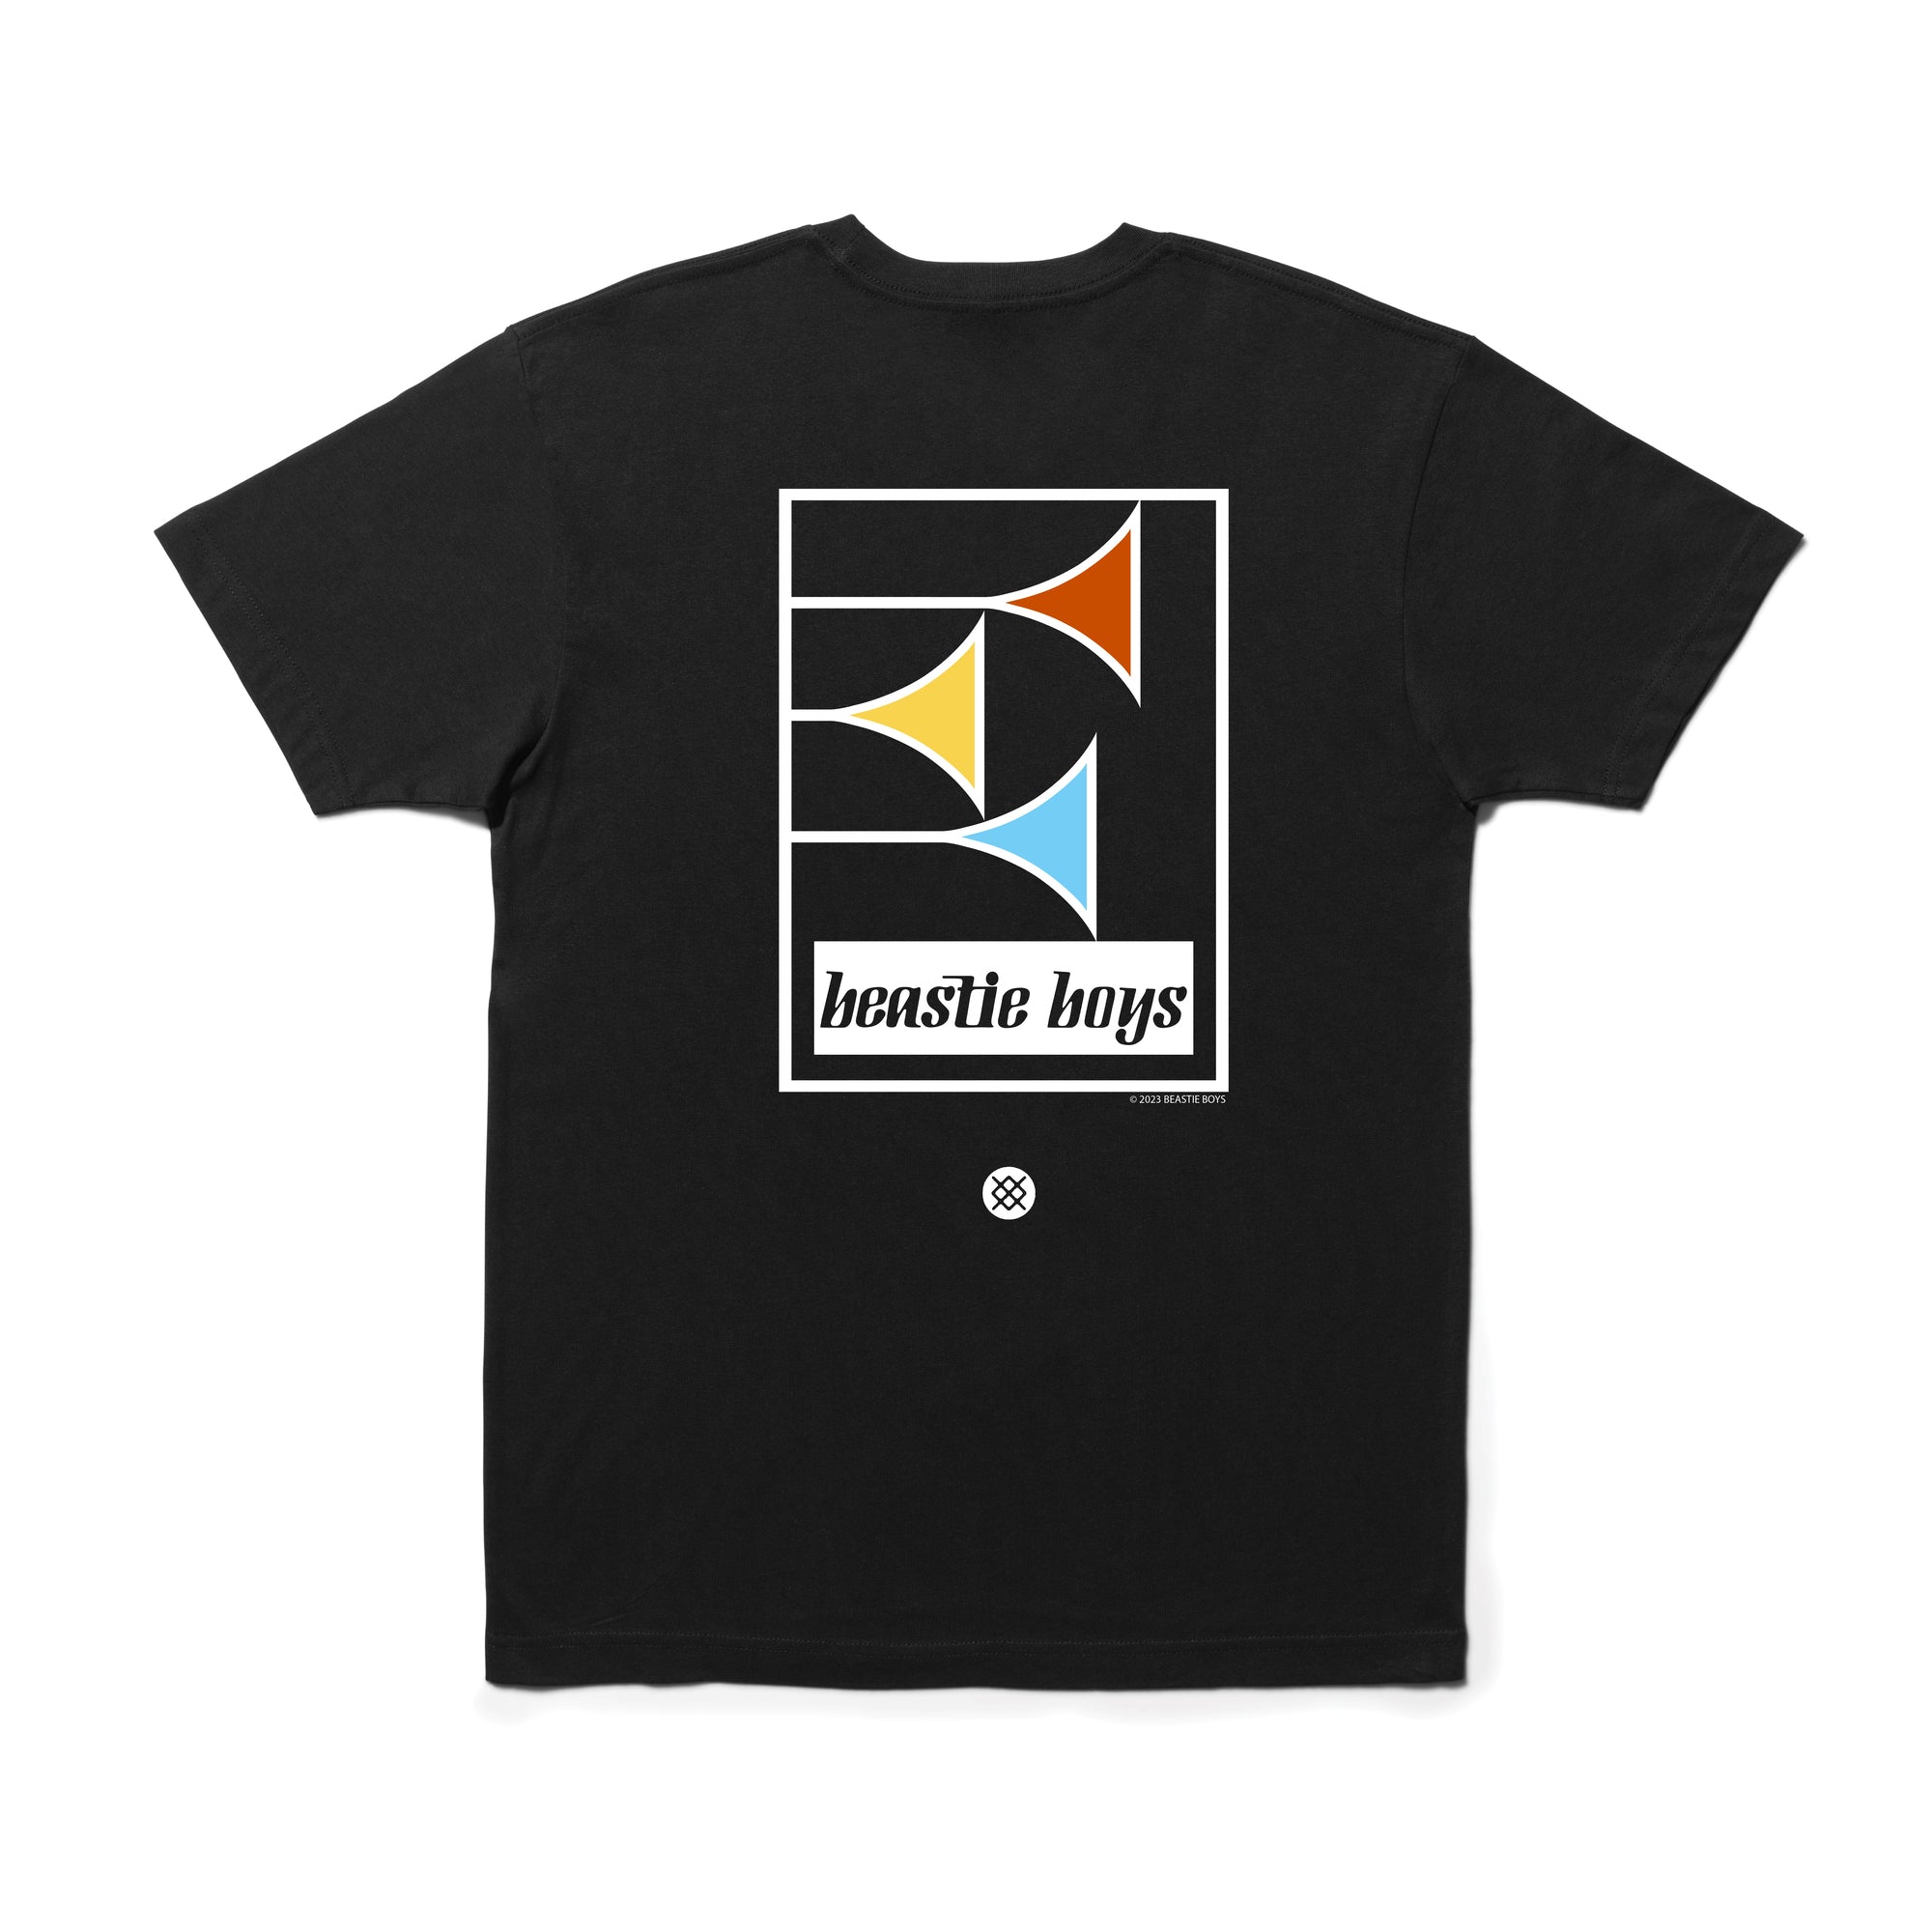 THREE YEAR BOOTS, THE BIG TAKEOVER & SO WHATCHA WANT? Beastie Boys and Bad  Brains shirts are here! My first double drop!! Each shirt is a rip/homage  to th